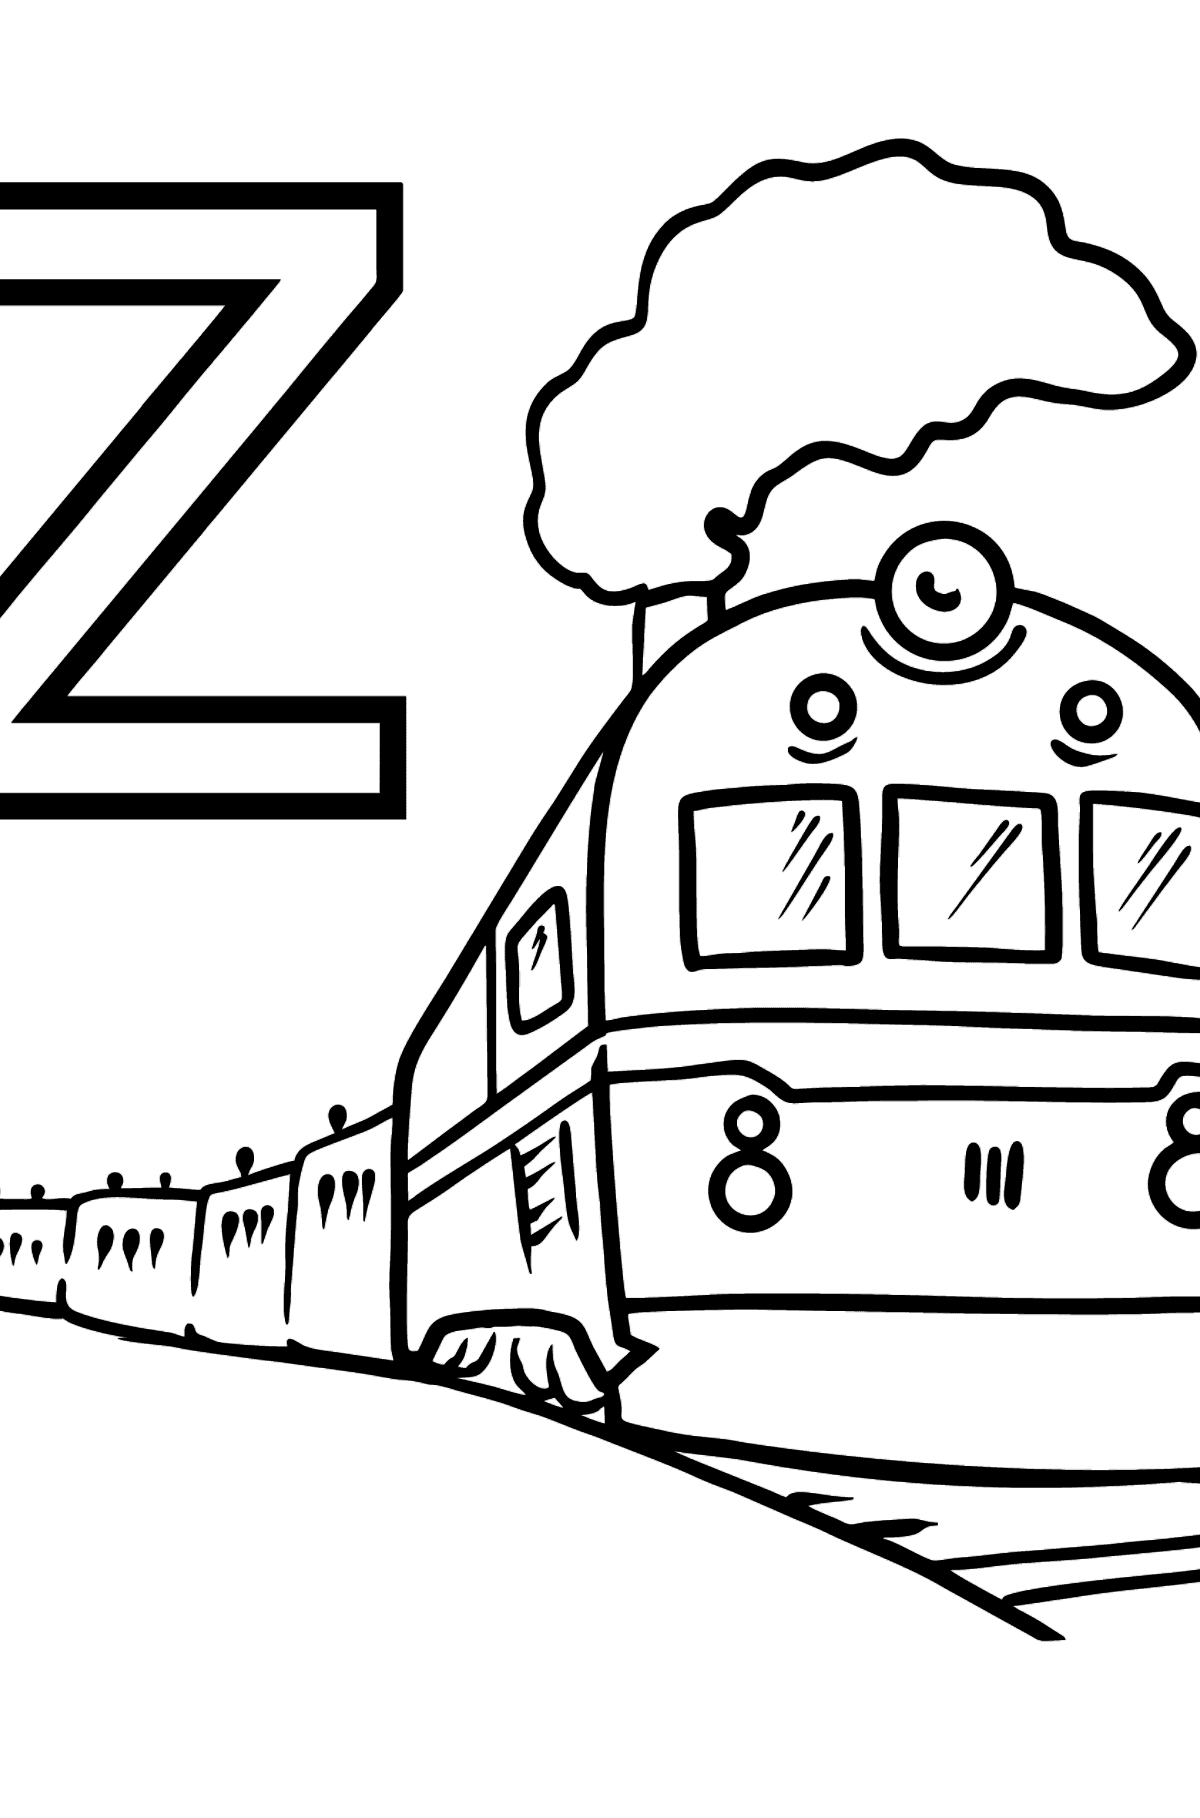 German Letter Z coloring pages - ZUG - Coloring Pages for Kids